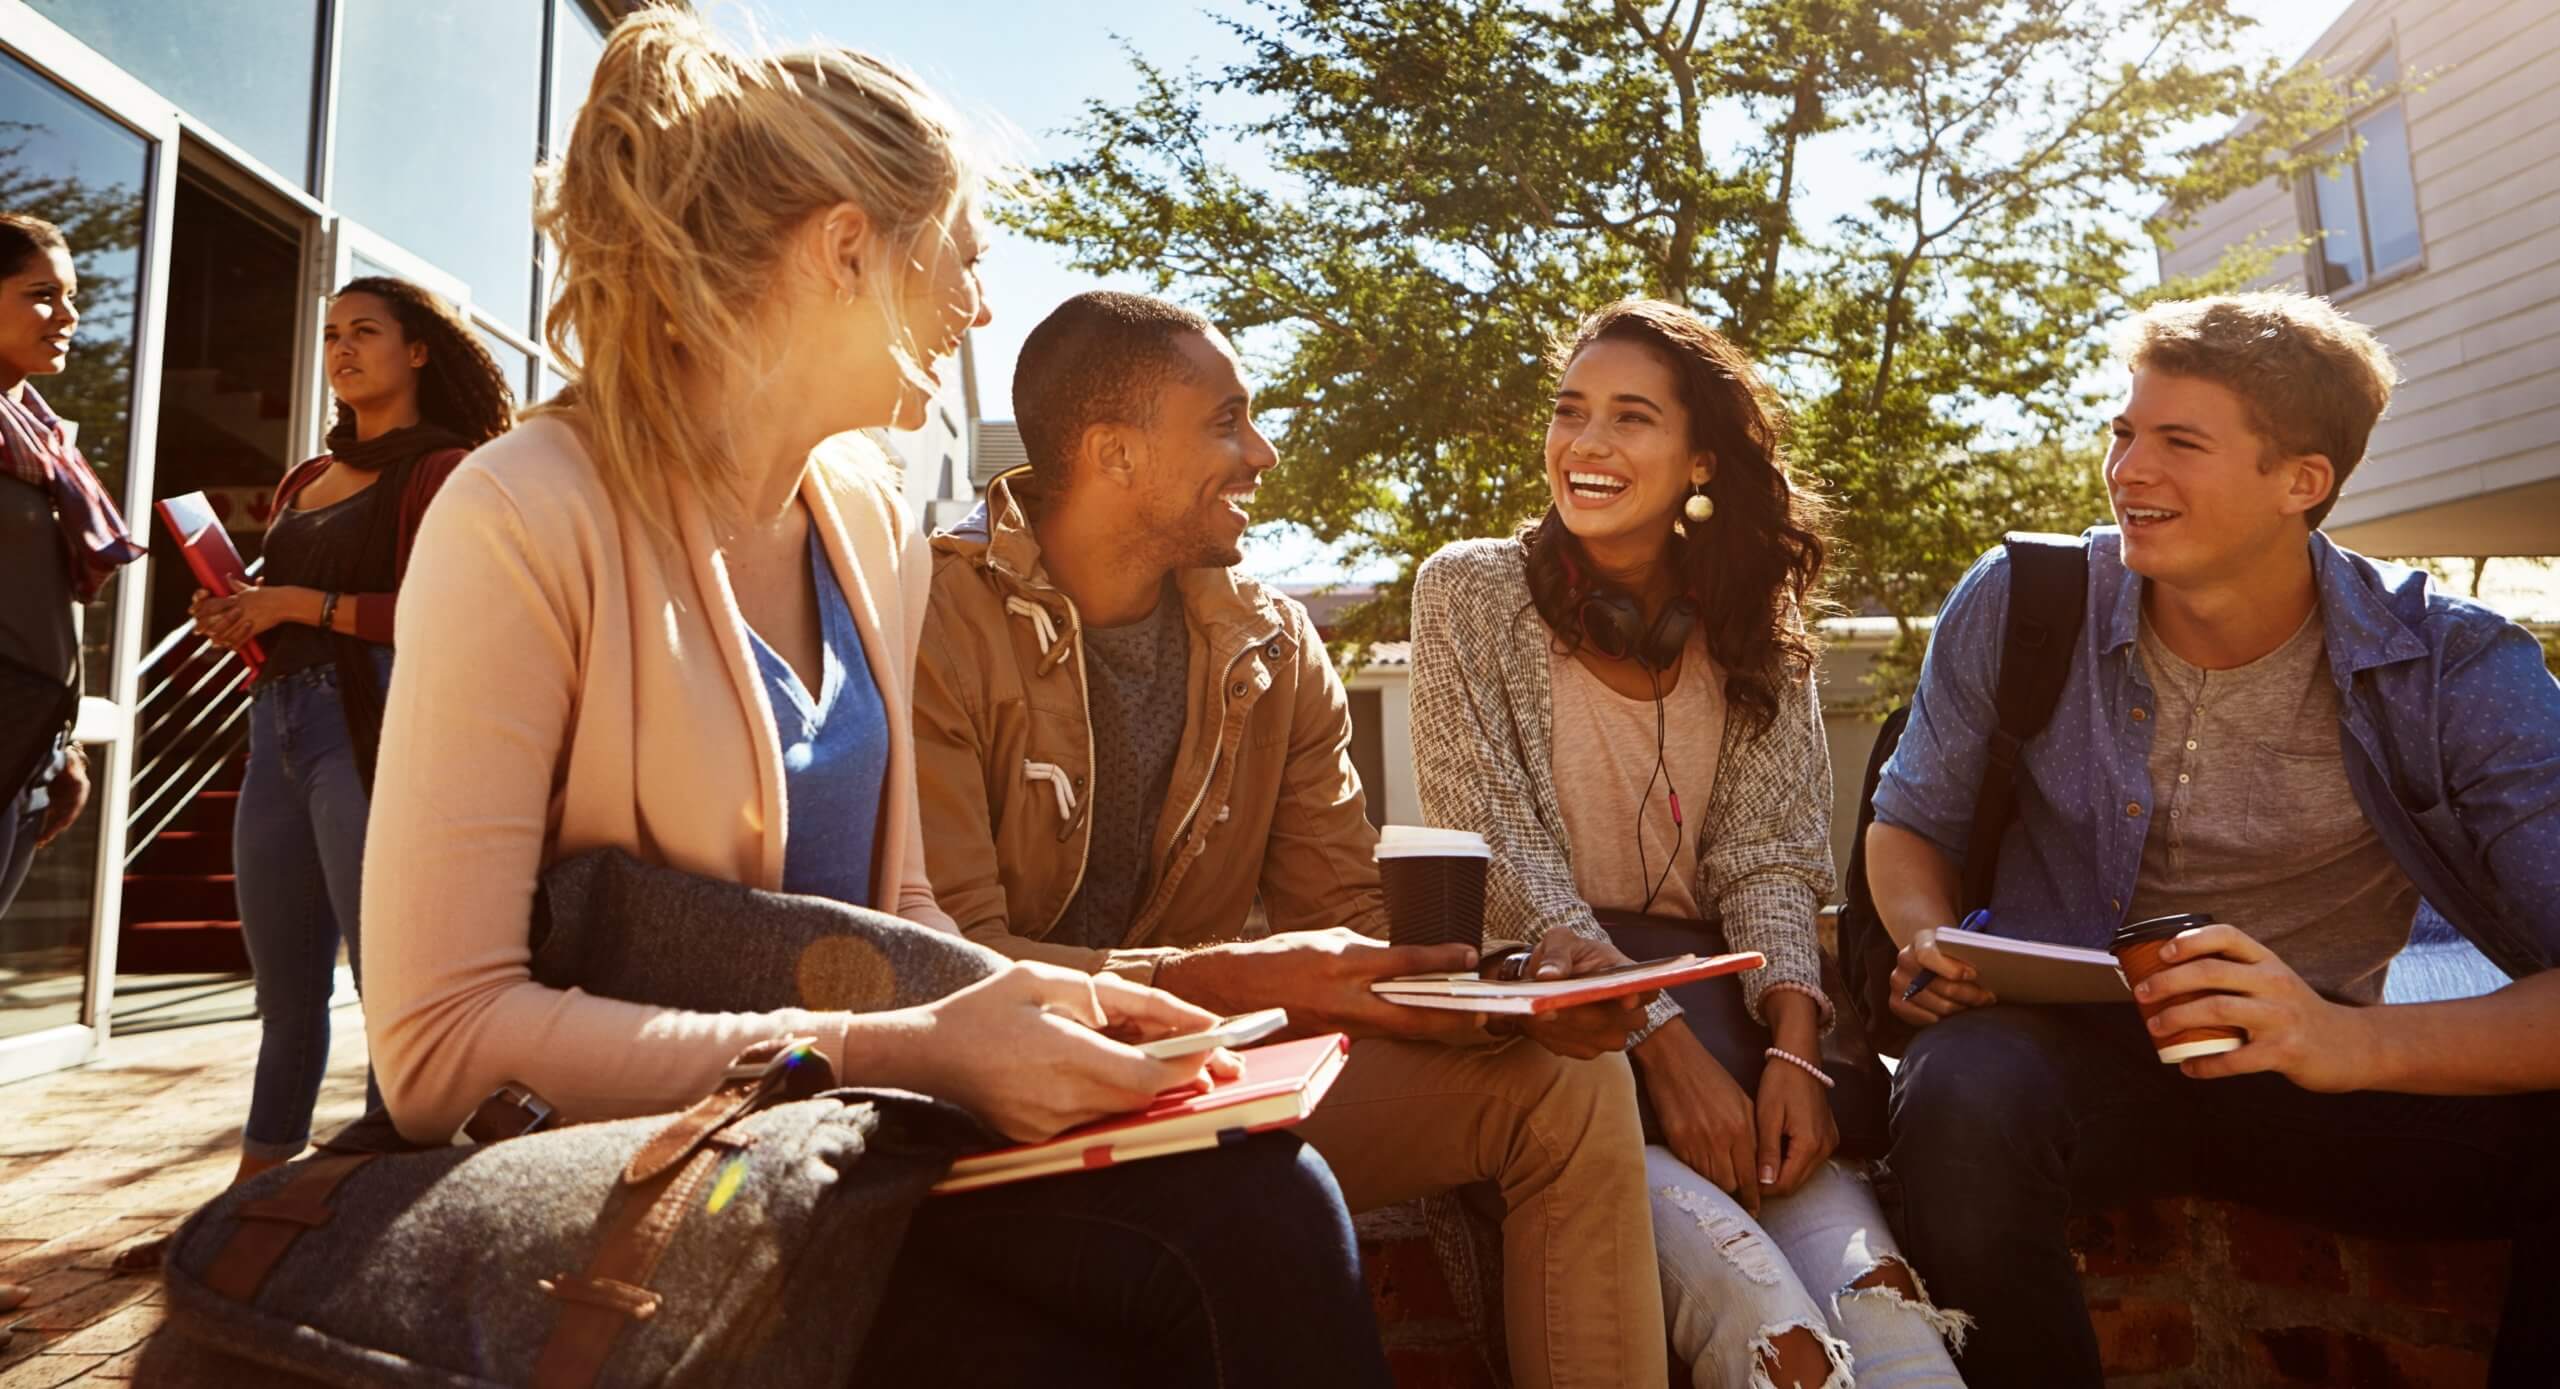 A group of students happily discuss something on campus.